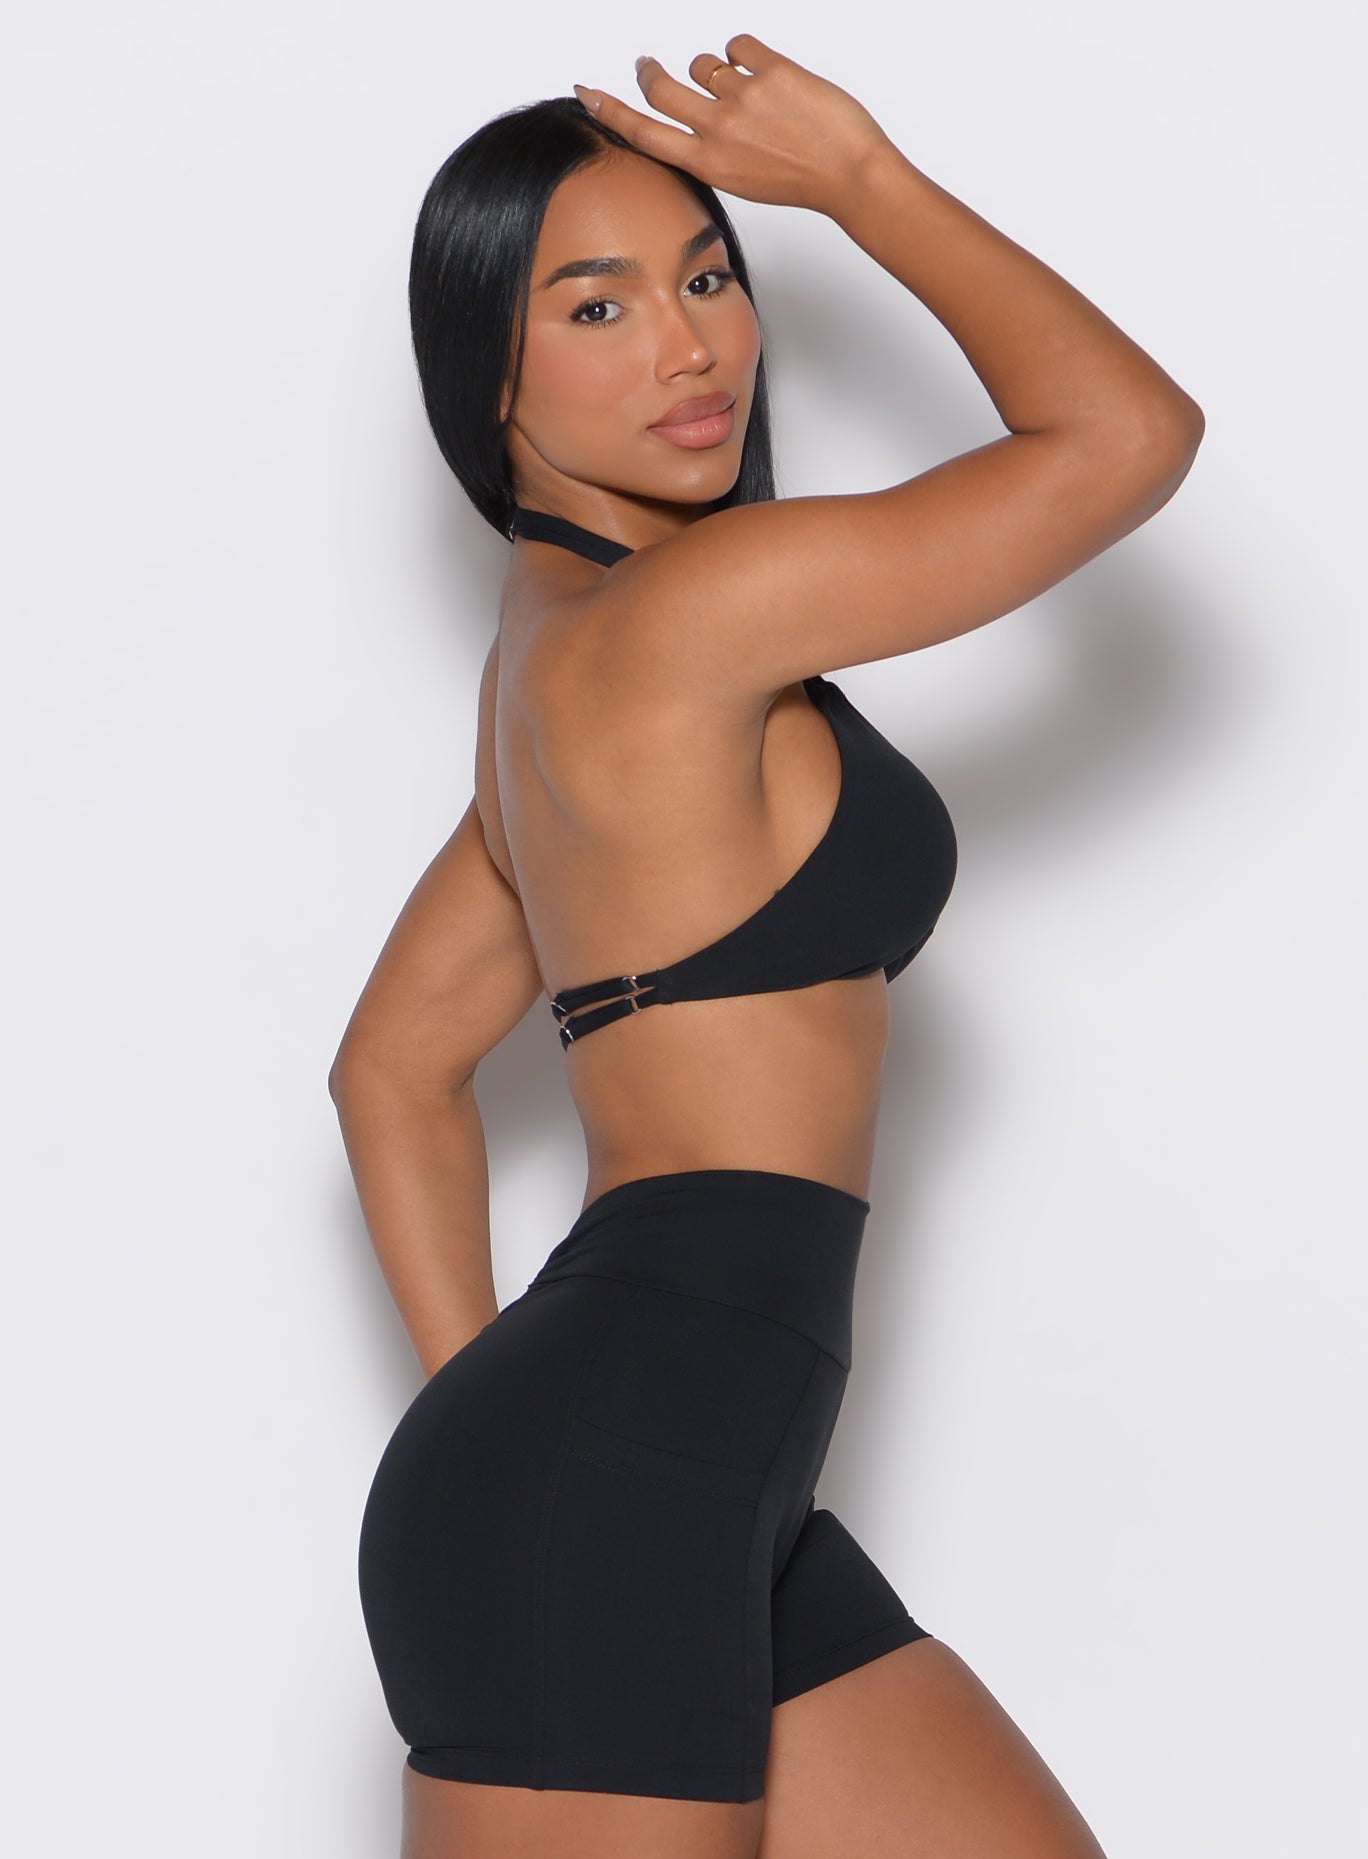 right side profile view of a model wearing our black Butterfly Sports Bra along with a matching shorts